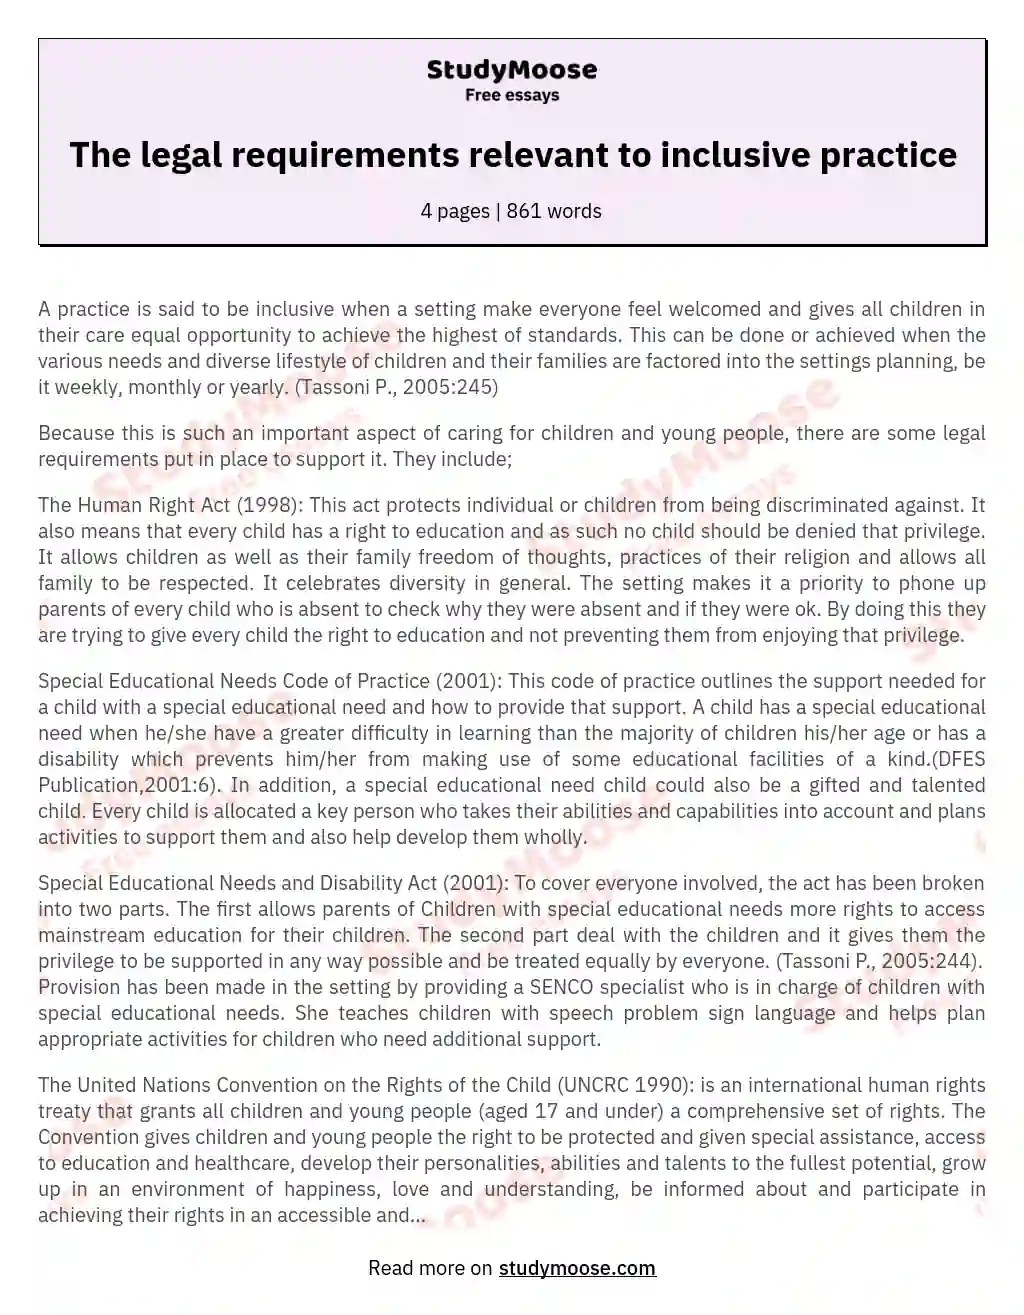 The legal requirements relevant to inclusive practice essay